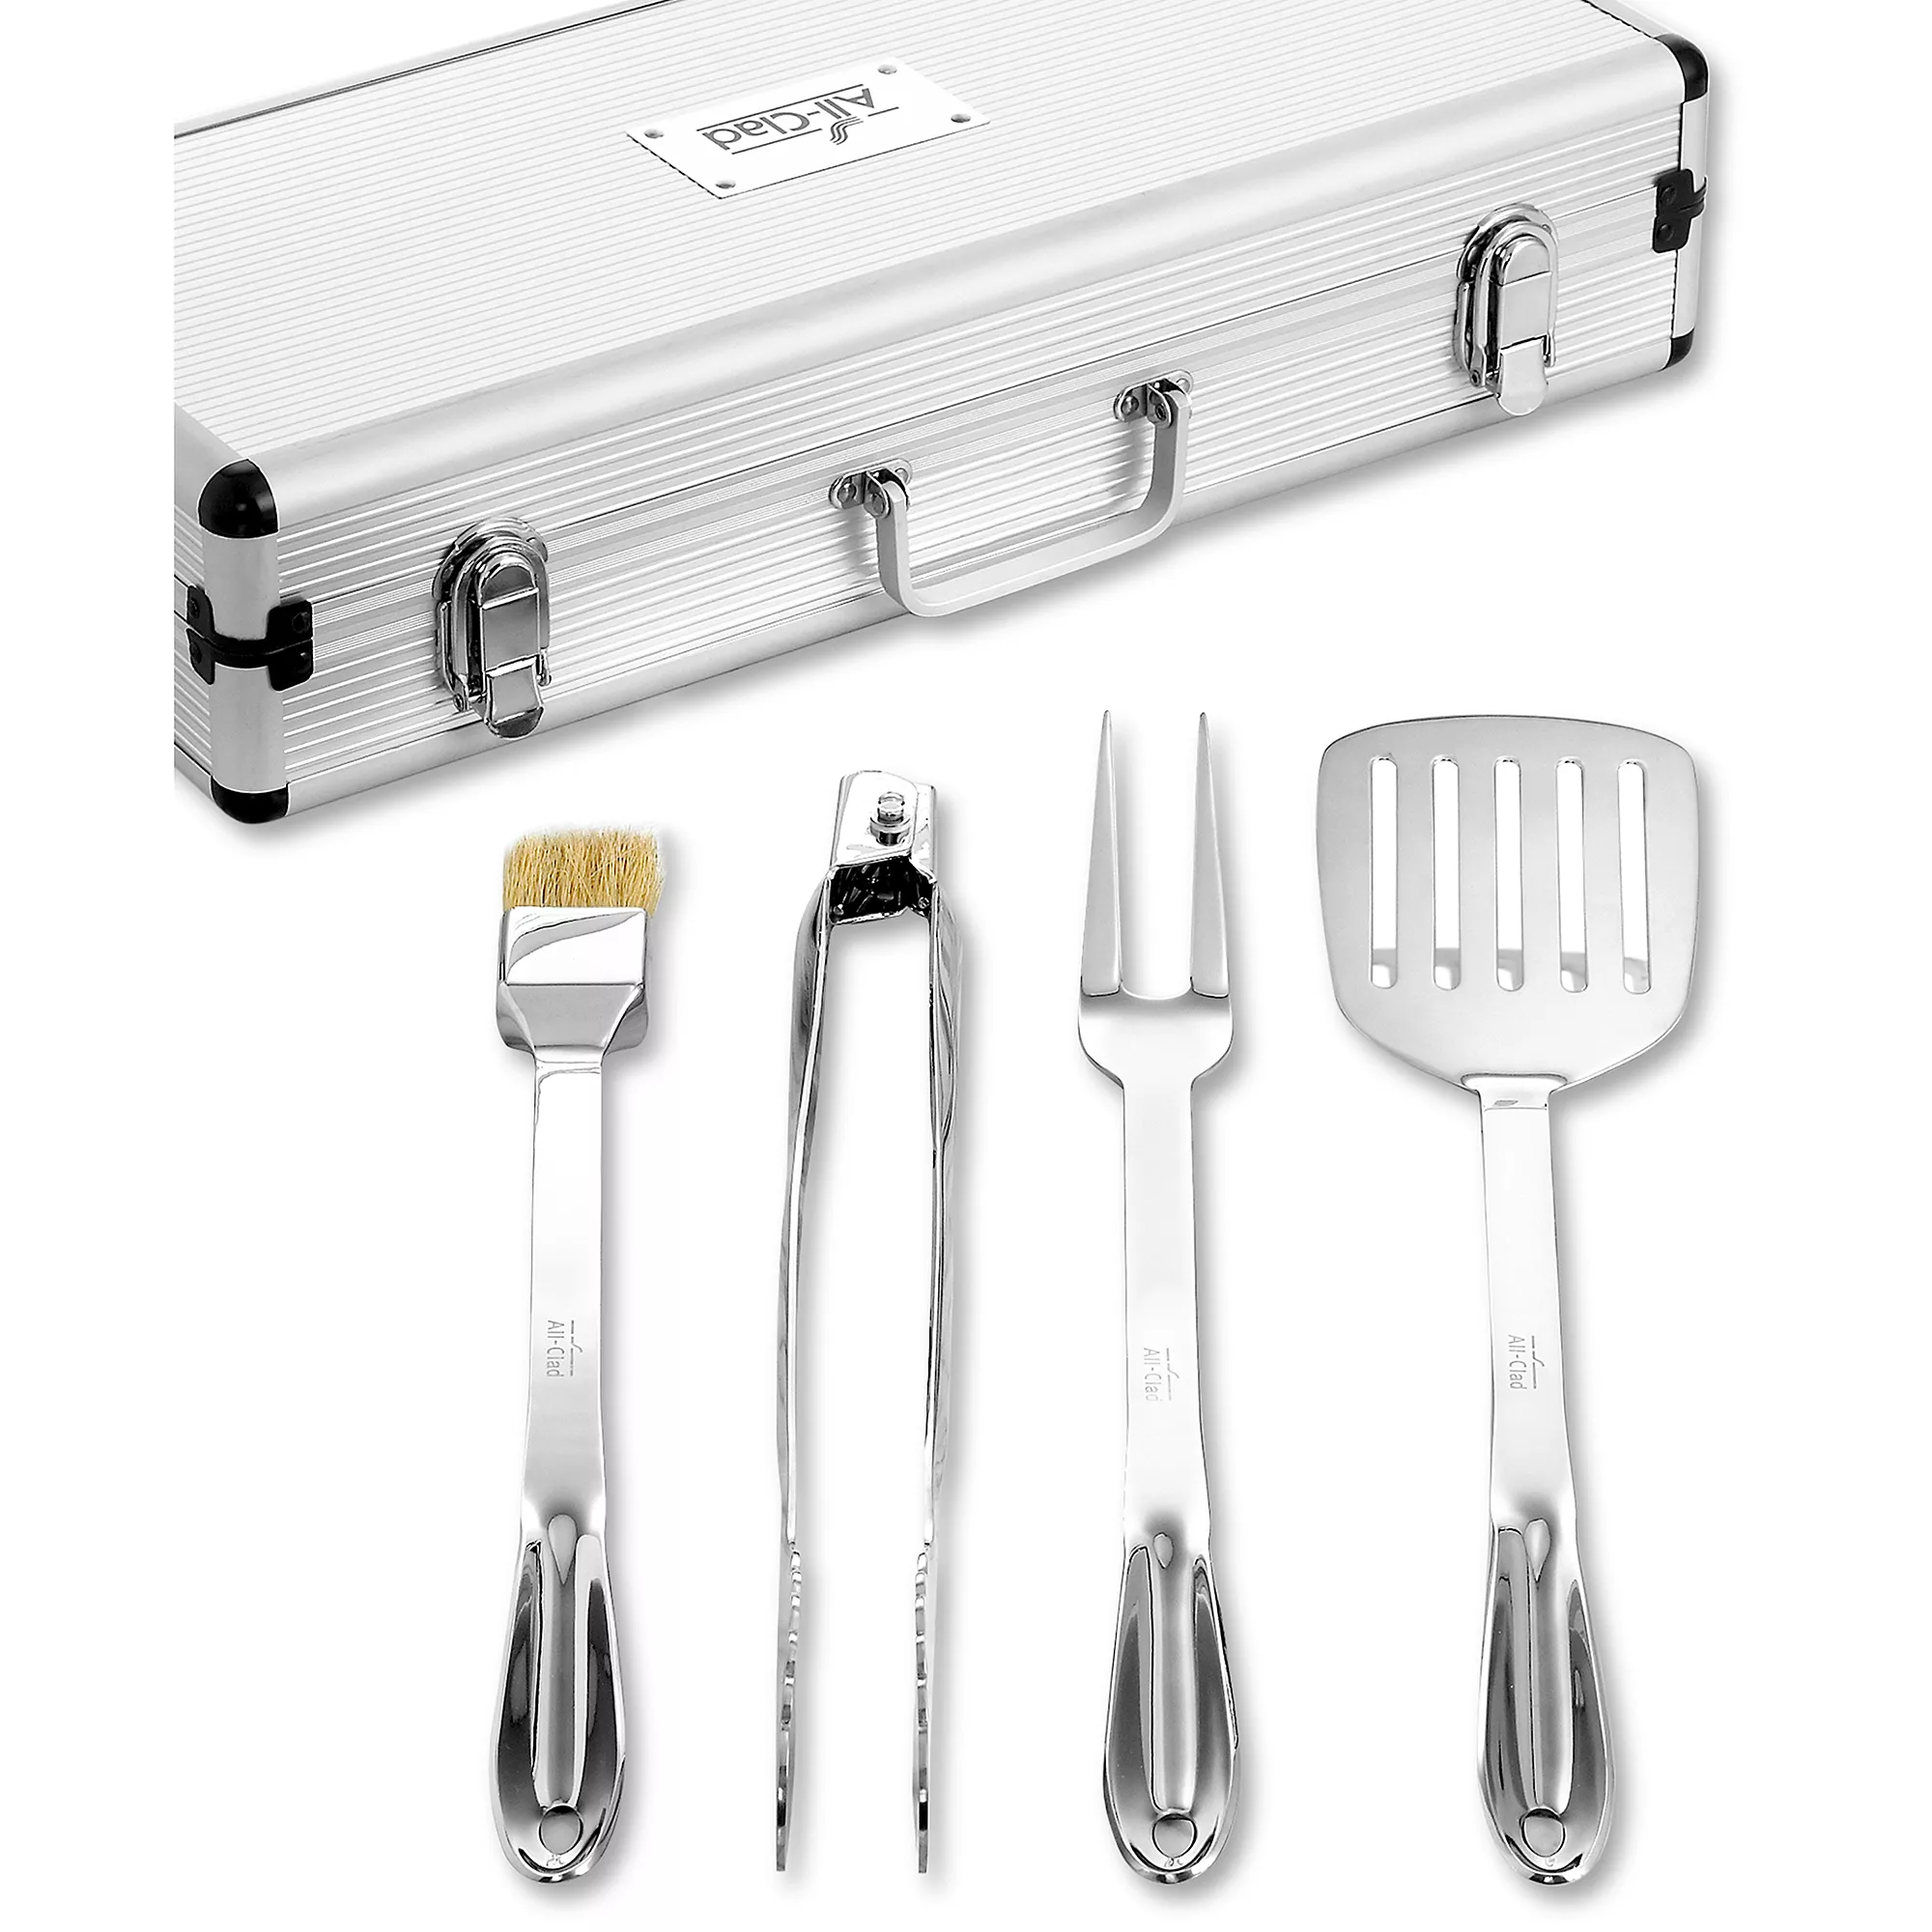 Bloomingdales - Save 25-40% on Kitchen and BBQ Tools